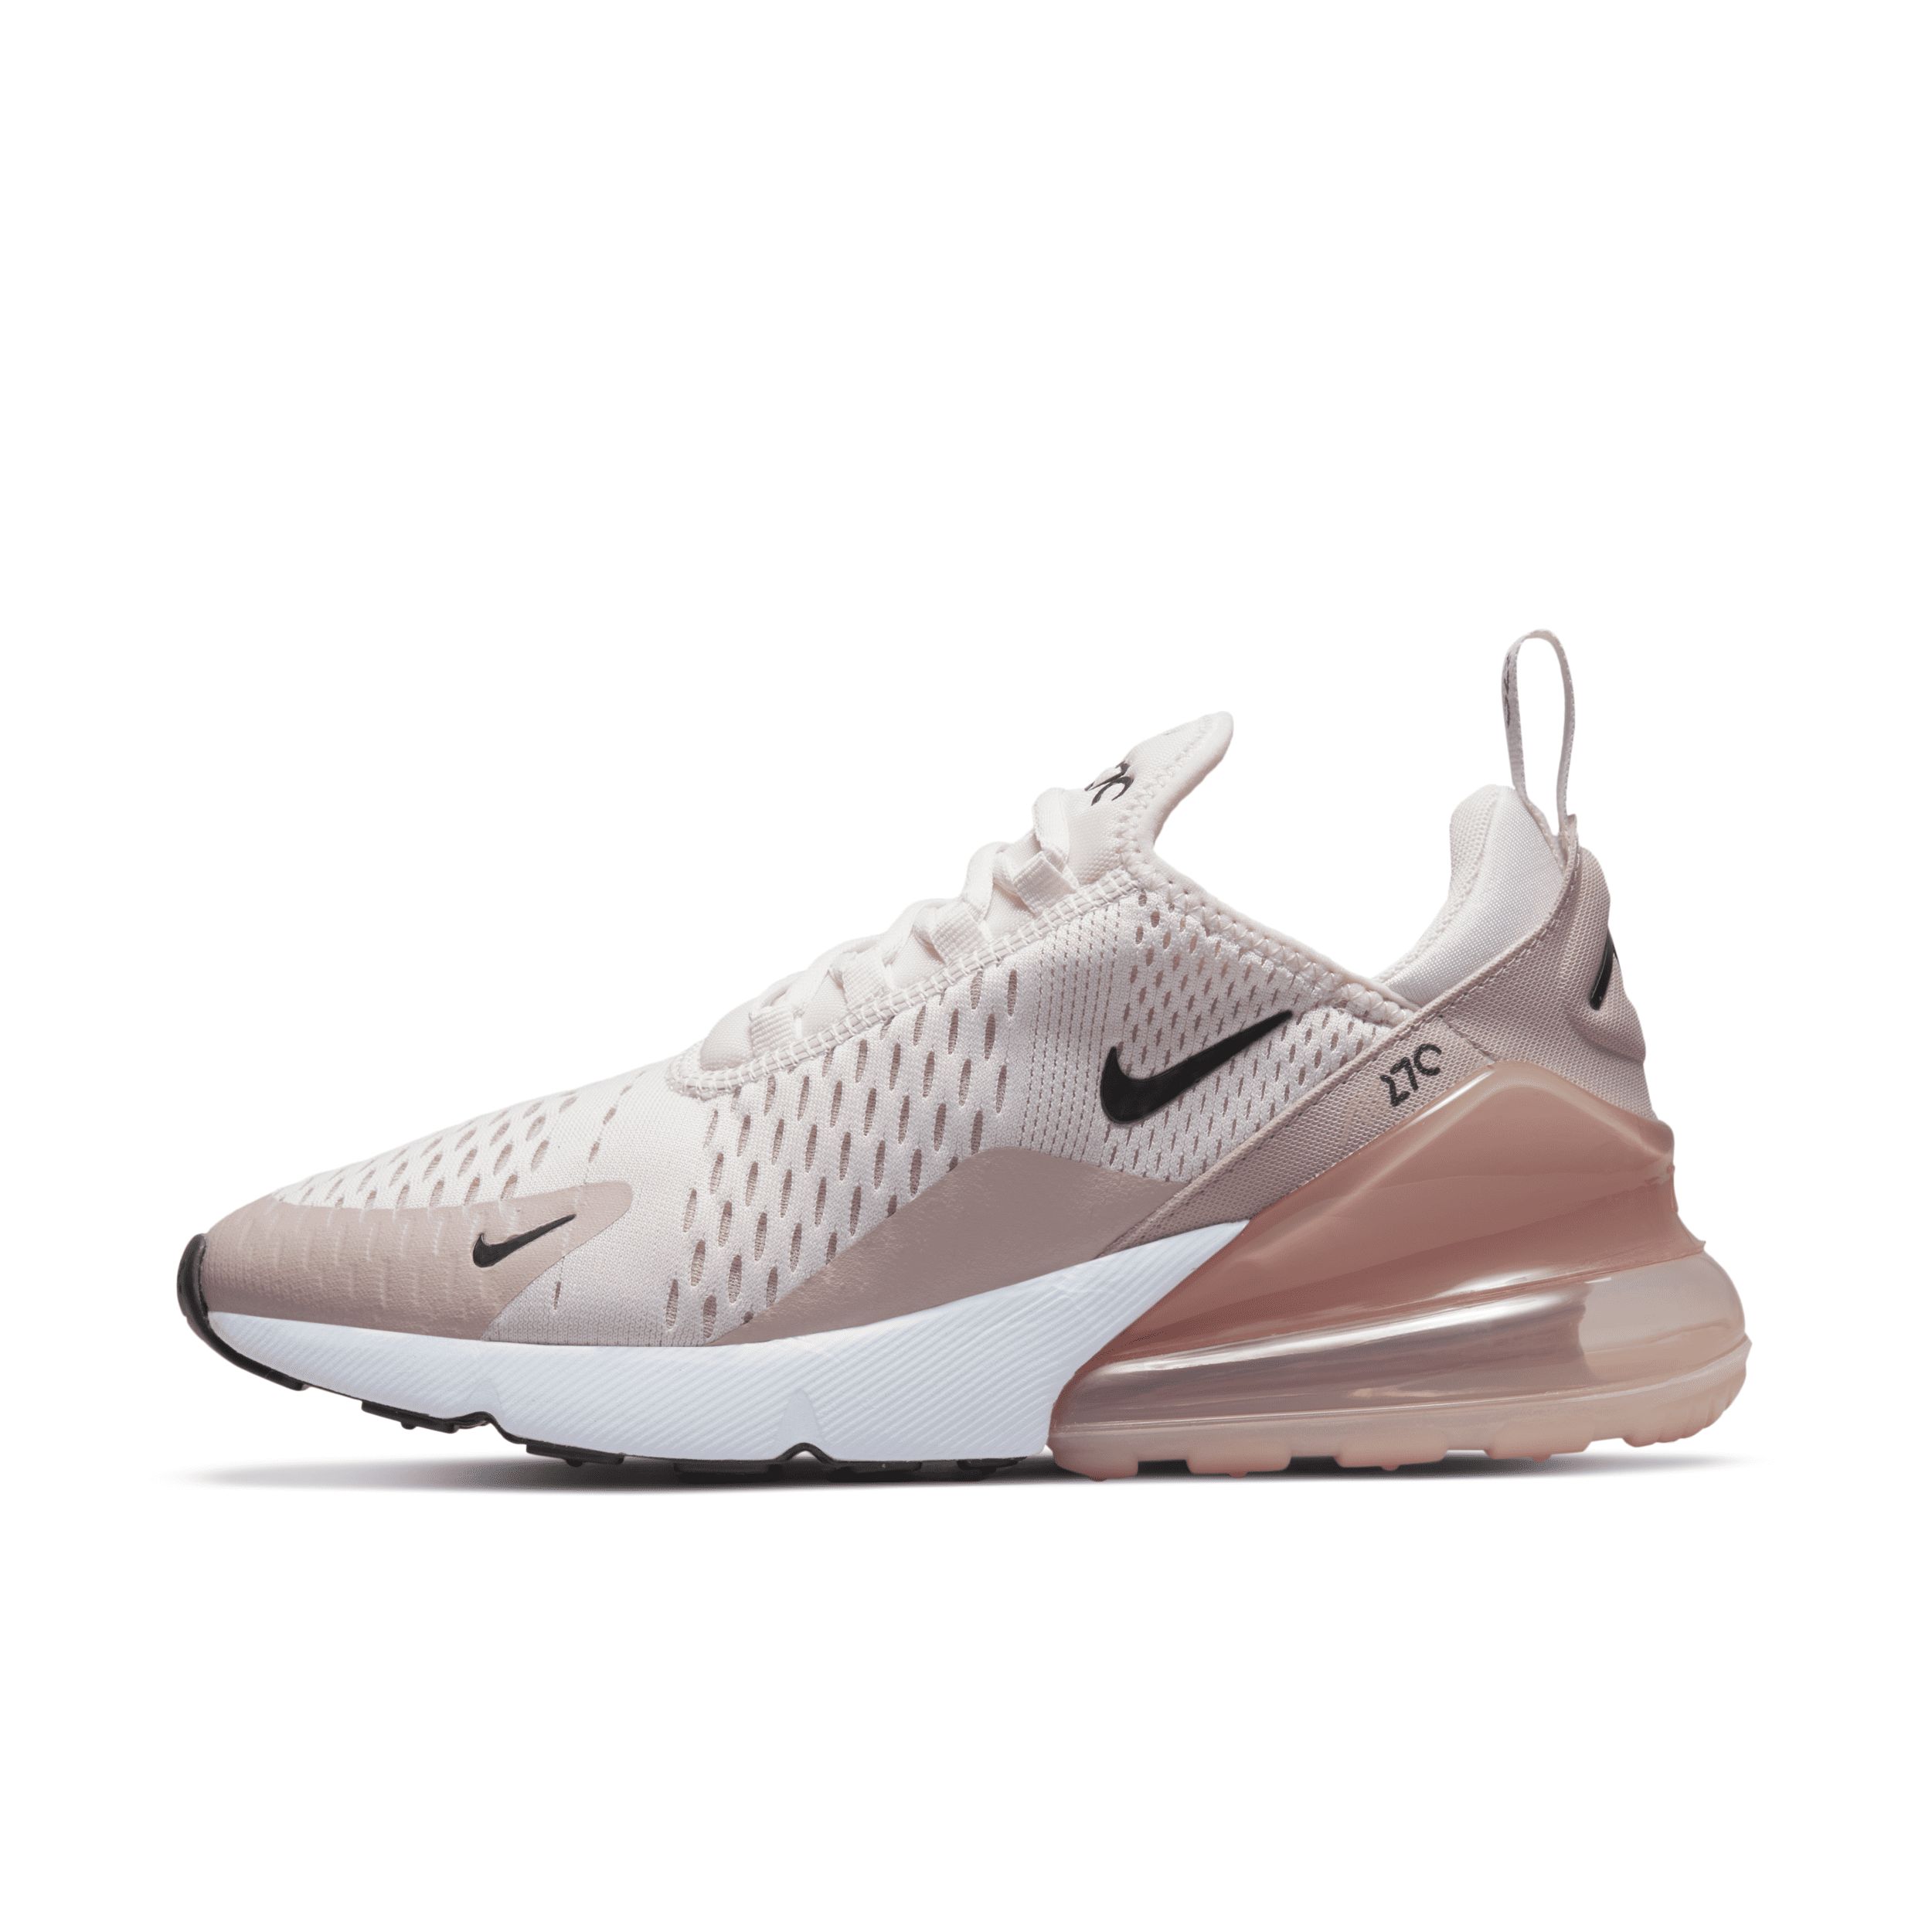 Nike Women's Air Max 270 Shoes in Pink, Size: 8 | AH6789-604 | Nike (US)